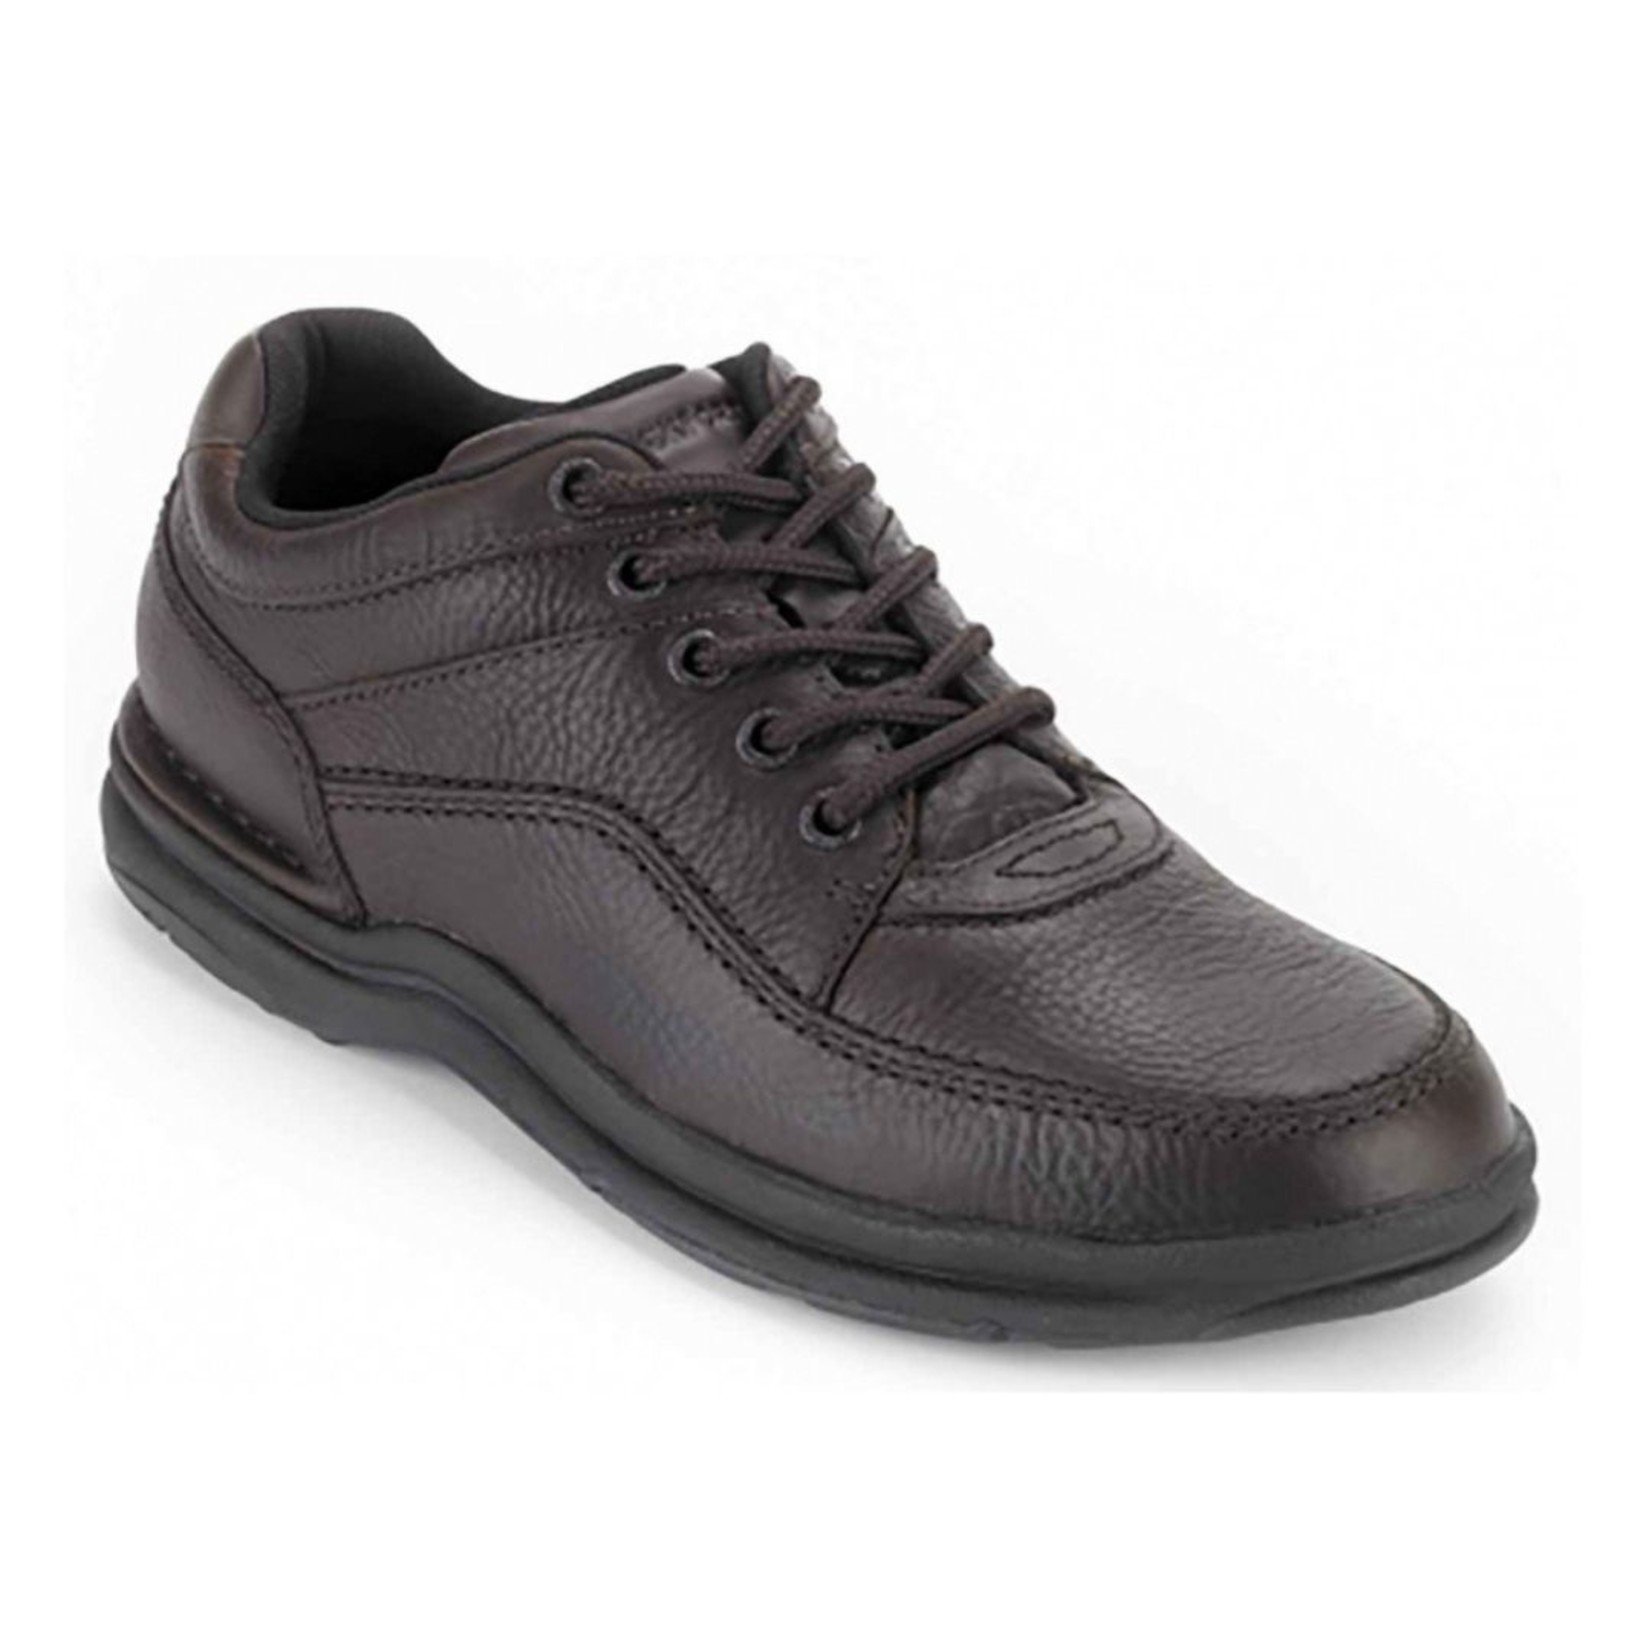 Rockport *Rockport WT Smooth Classic Men's Shoes